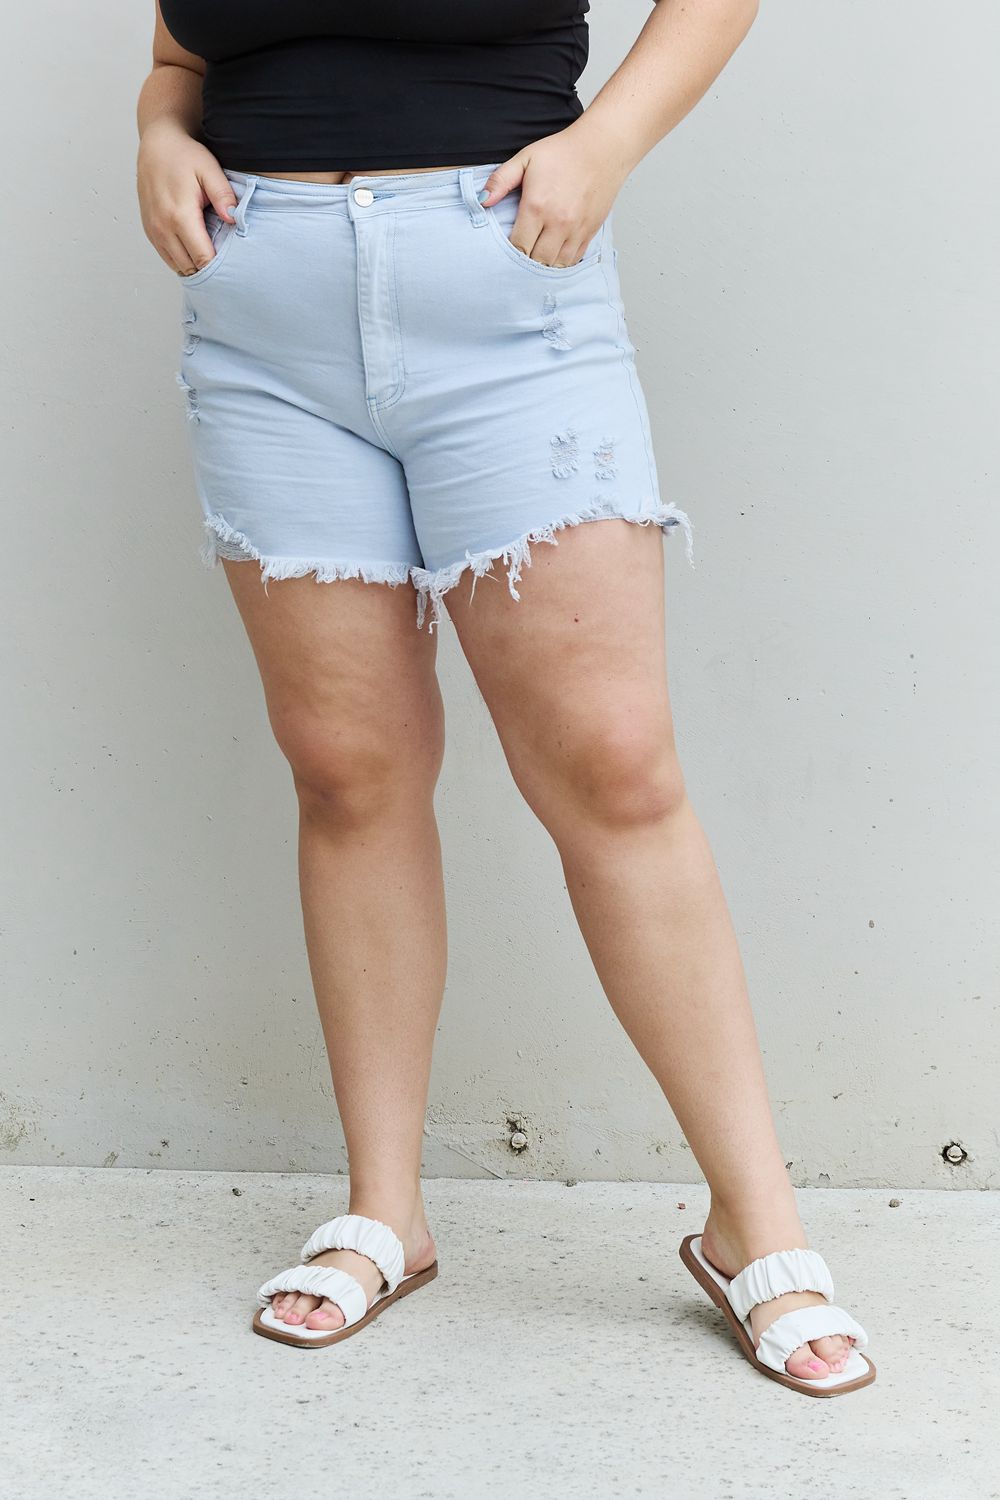 RISEN Katie Full Size High Waisted Distressed Shorts in Ice Blue - pvmark